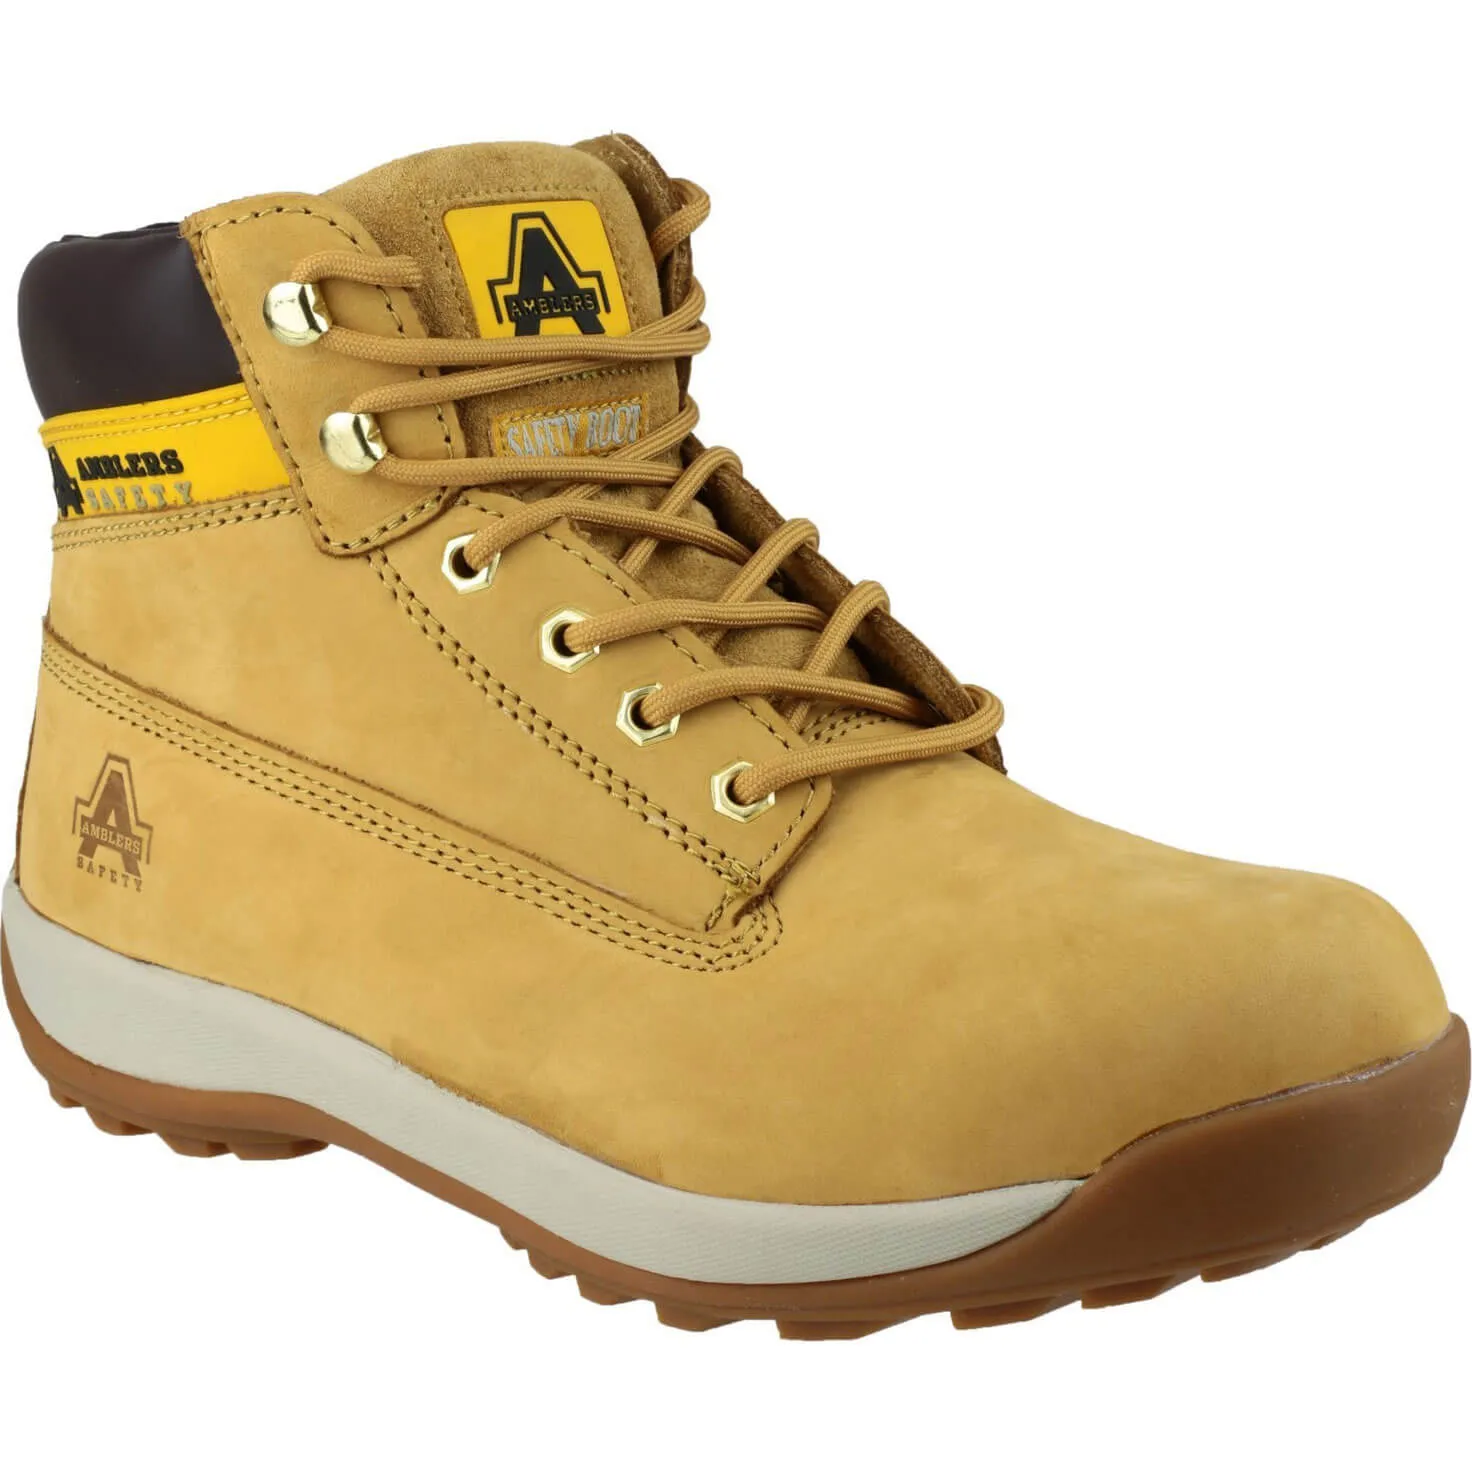 Amblers Mens Safety FS102 Safety Boots - Honey, Size 12